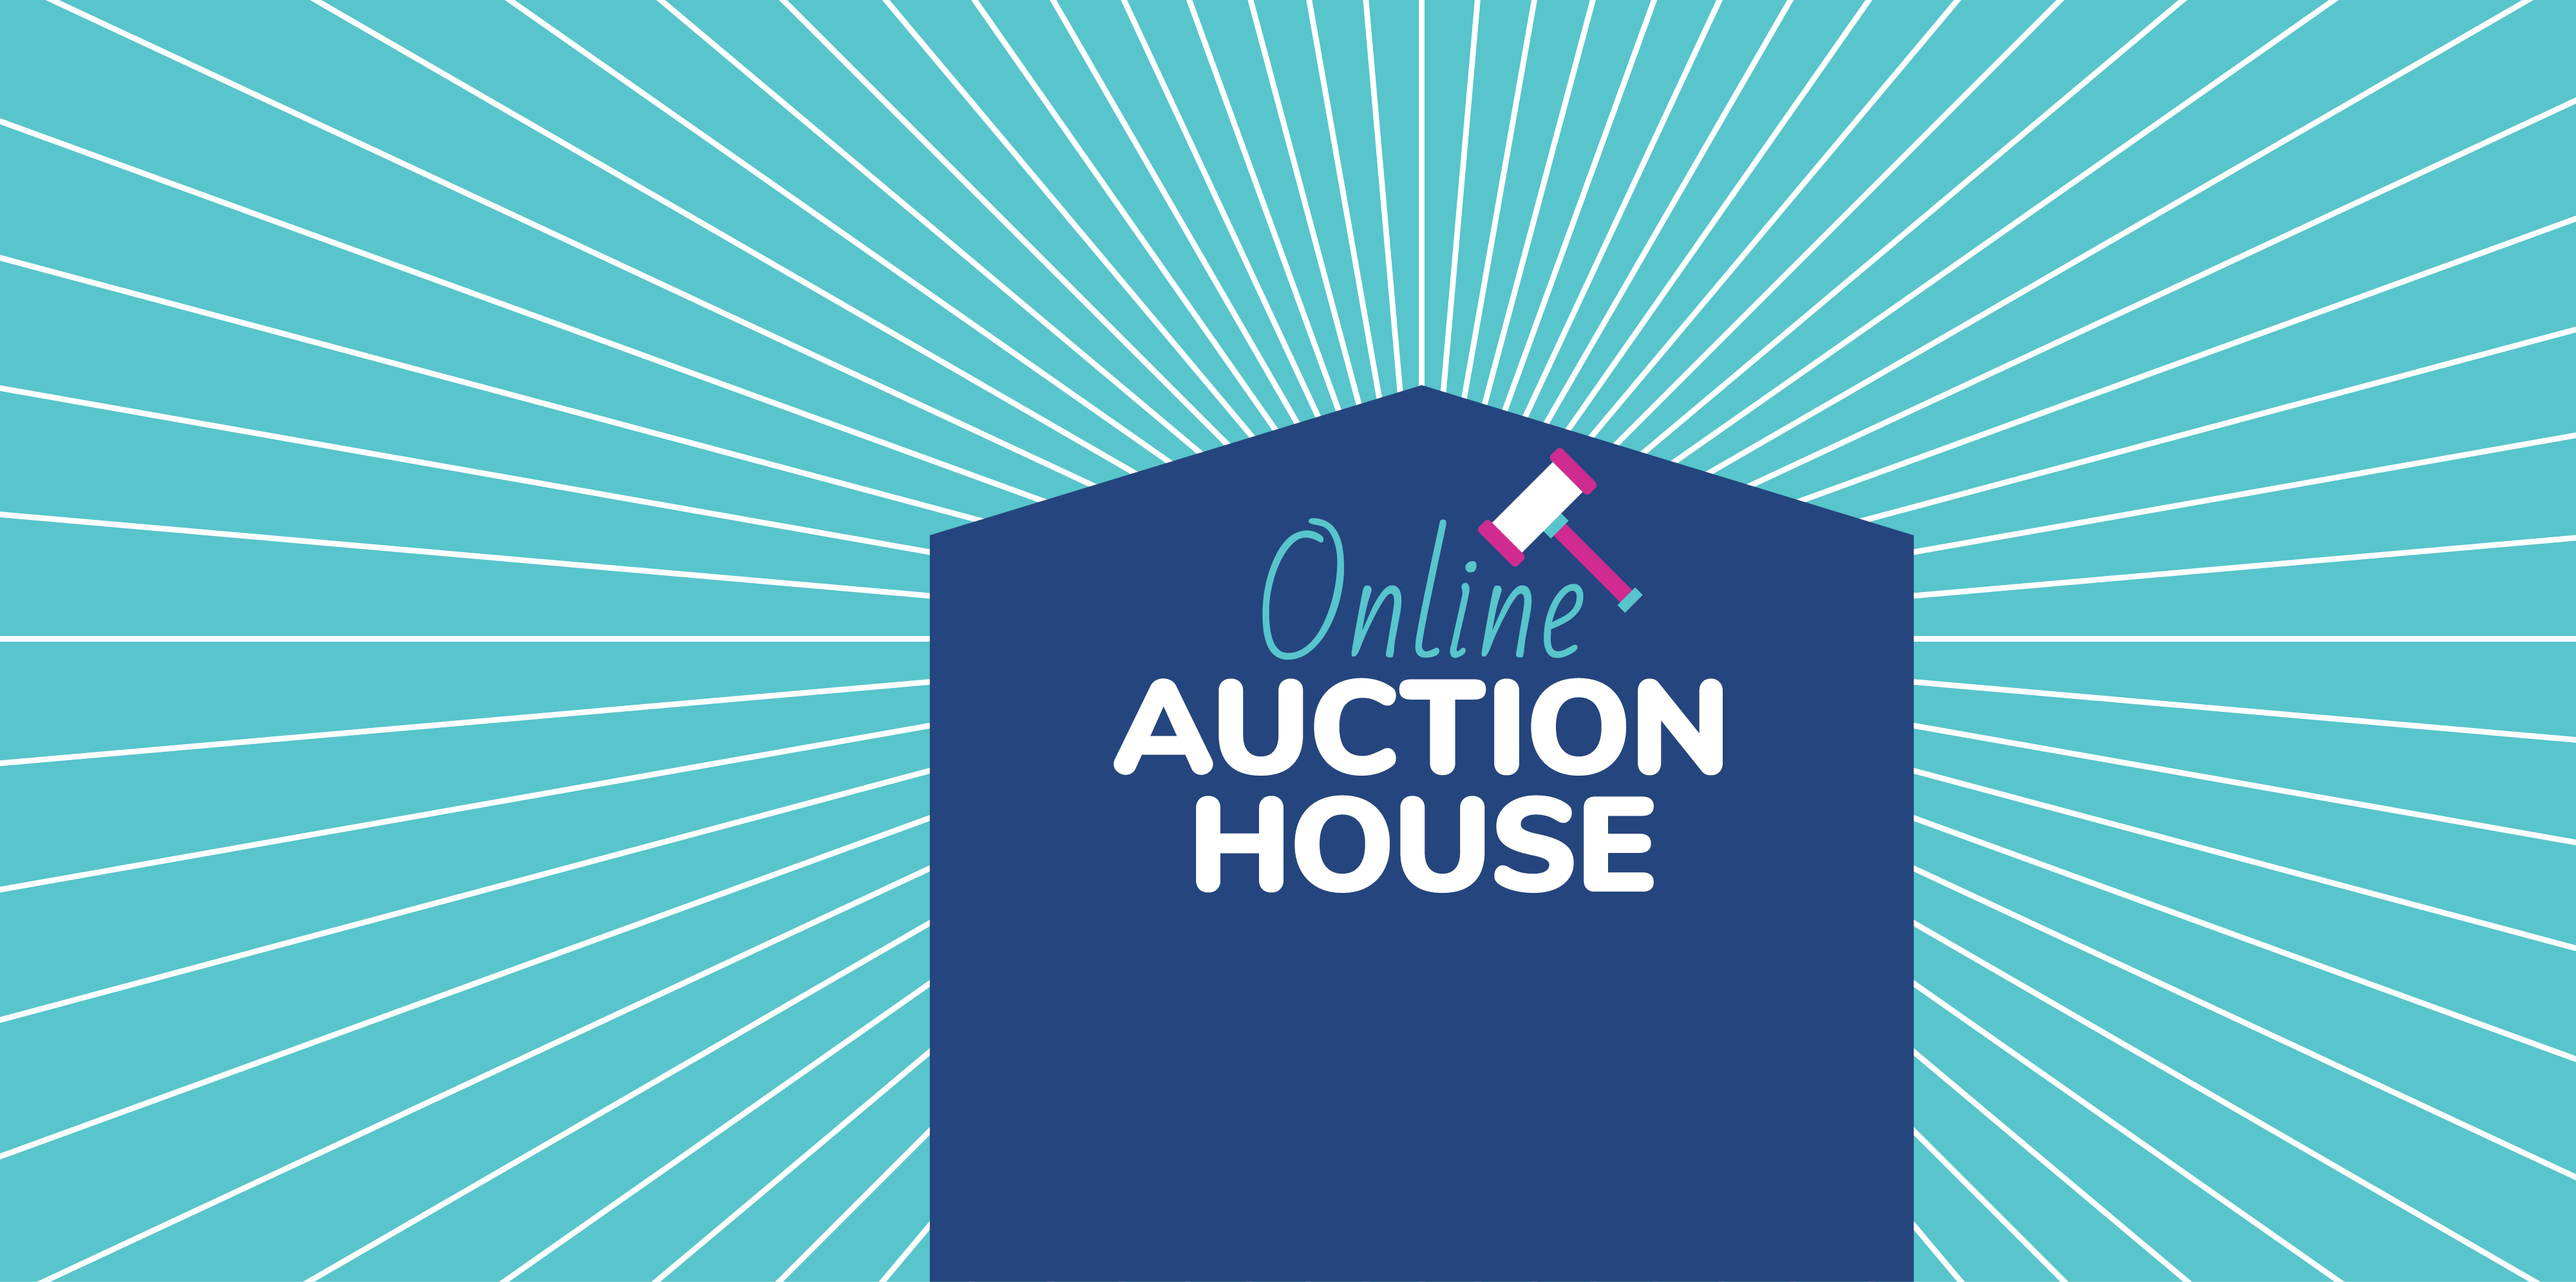 Online Auction House